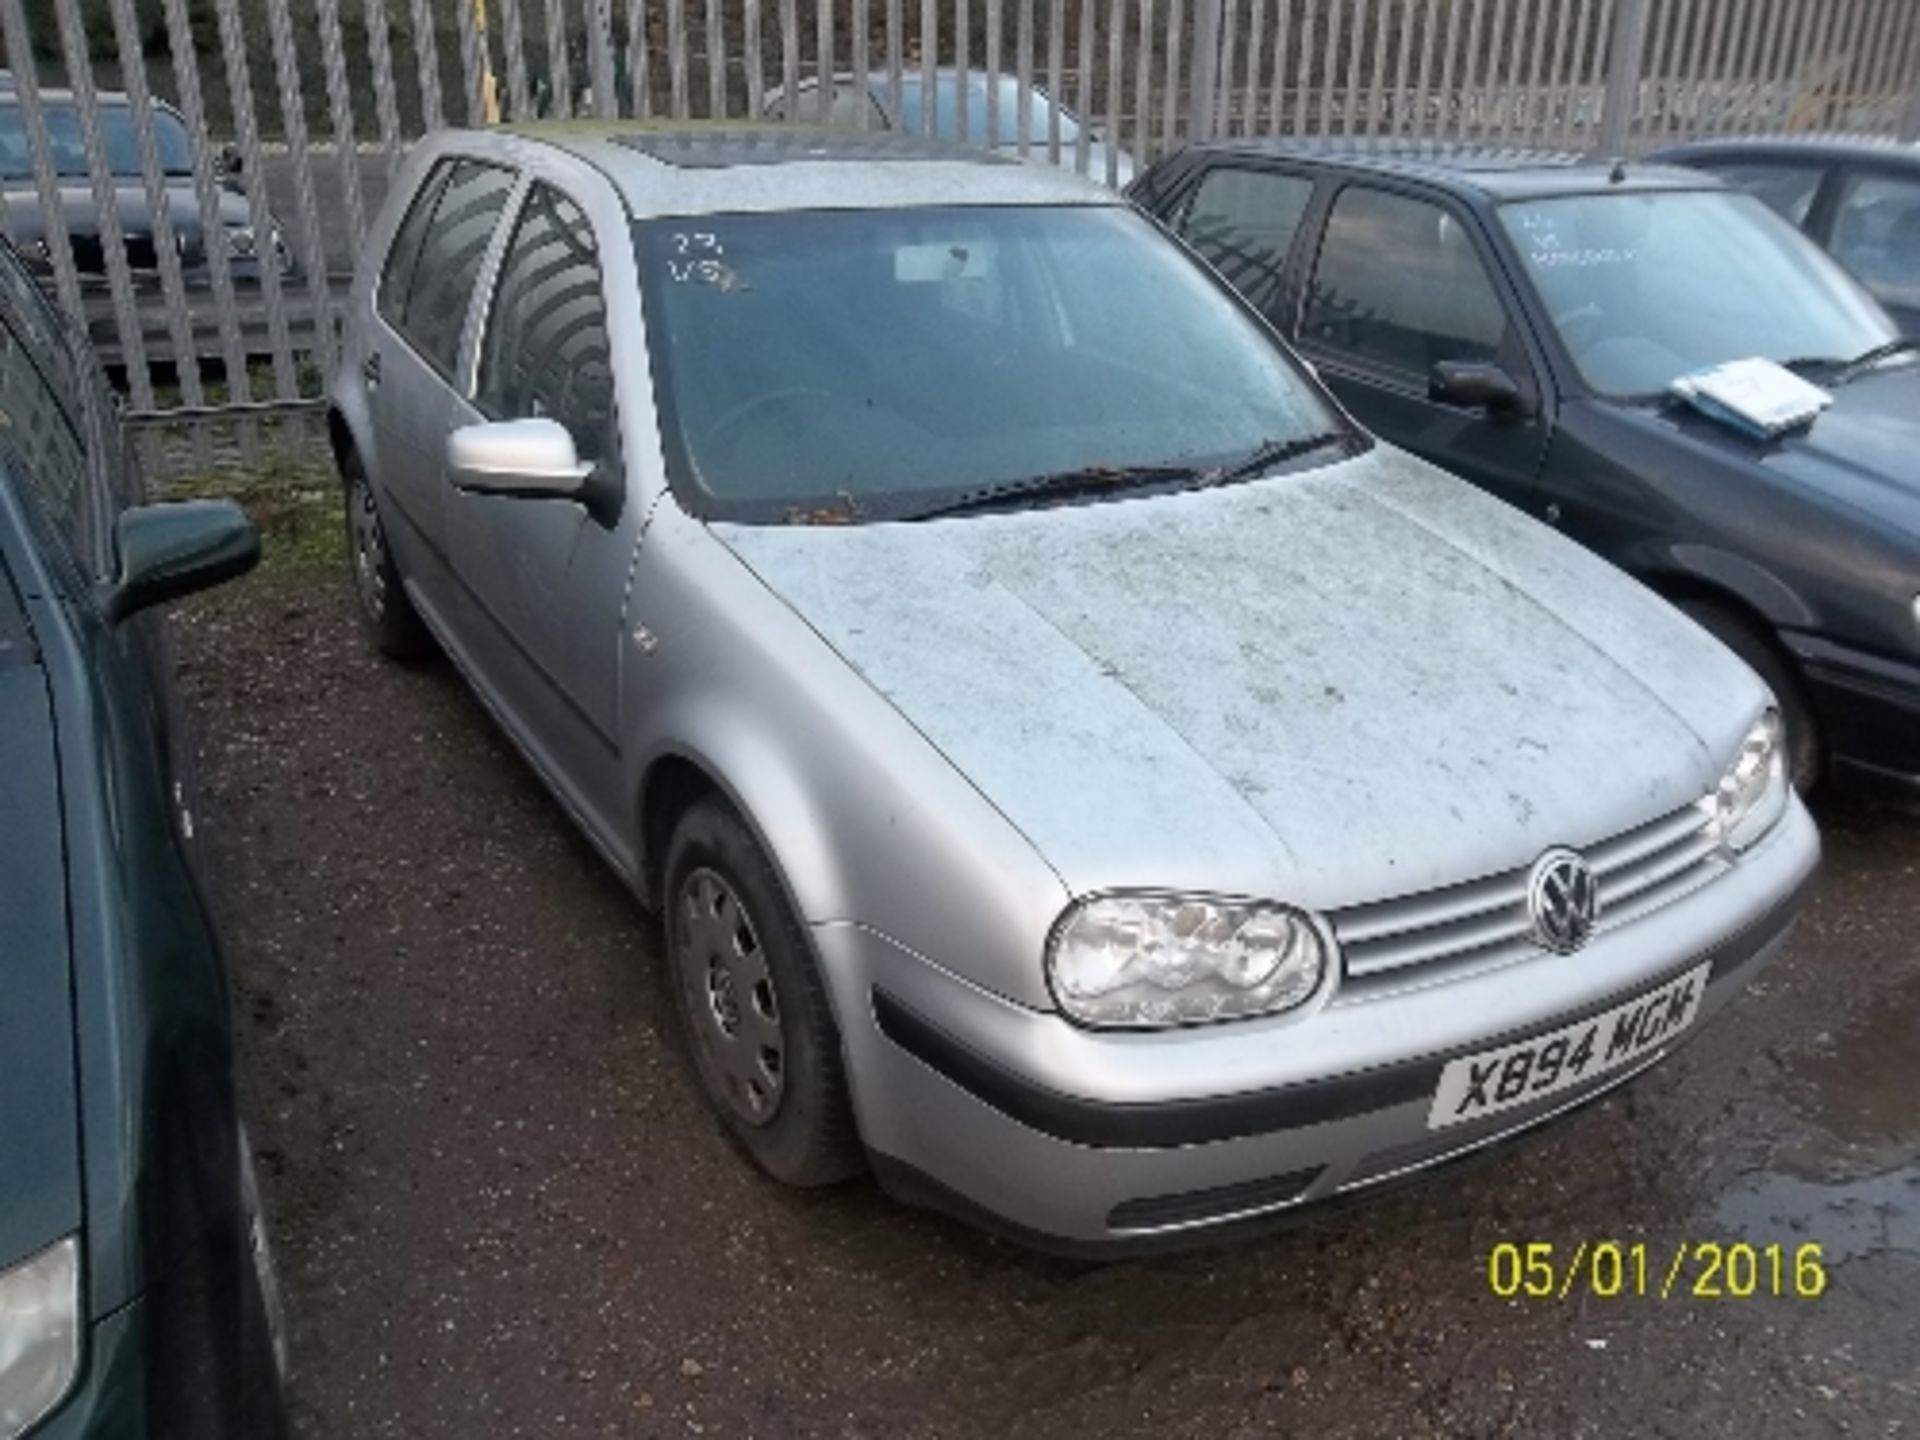 Volkswagen Golf S - X894 MGM Date of registration: 31.10.2000 1598cc, petrol, manual, silver - Image 2 of 4